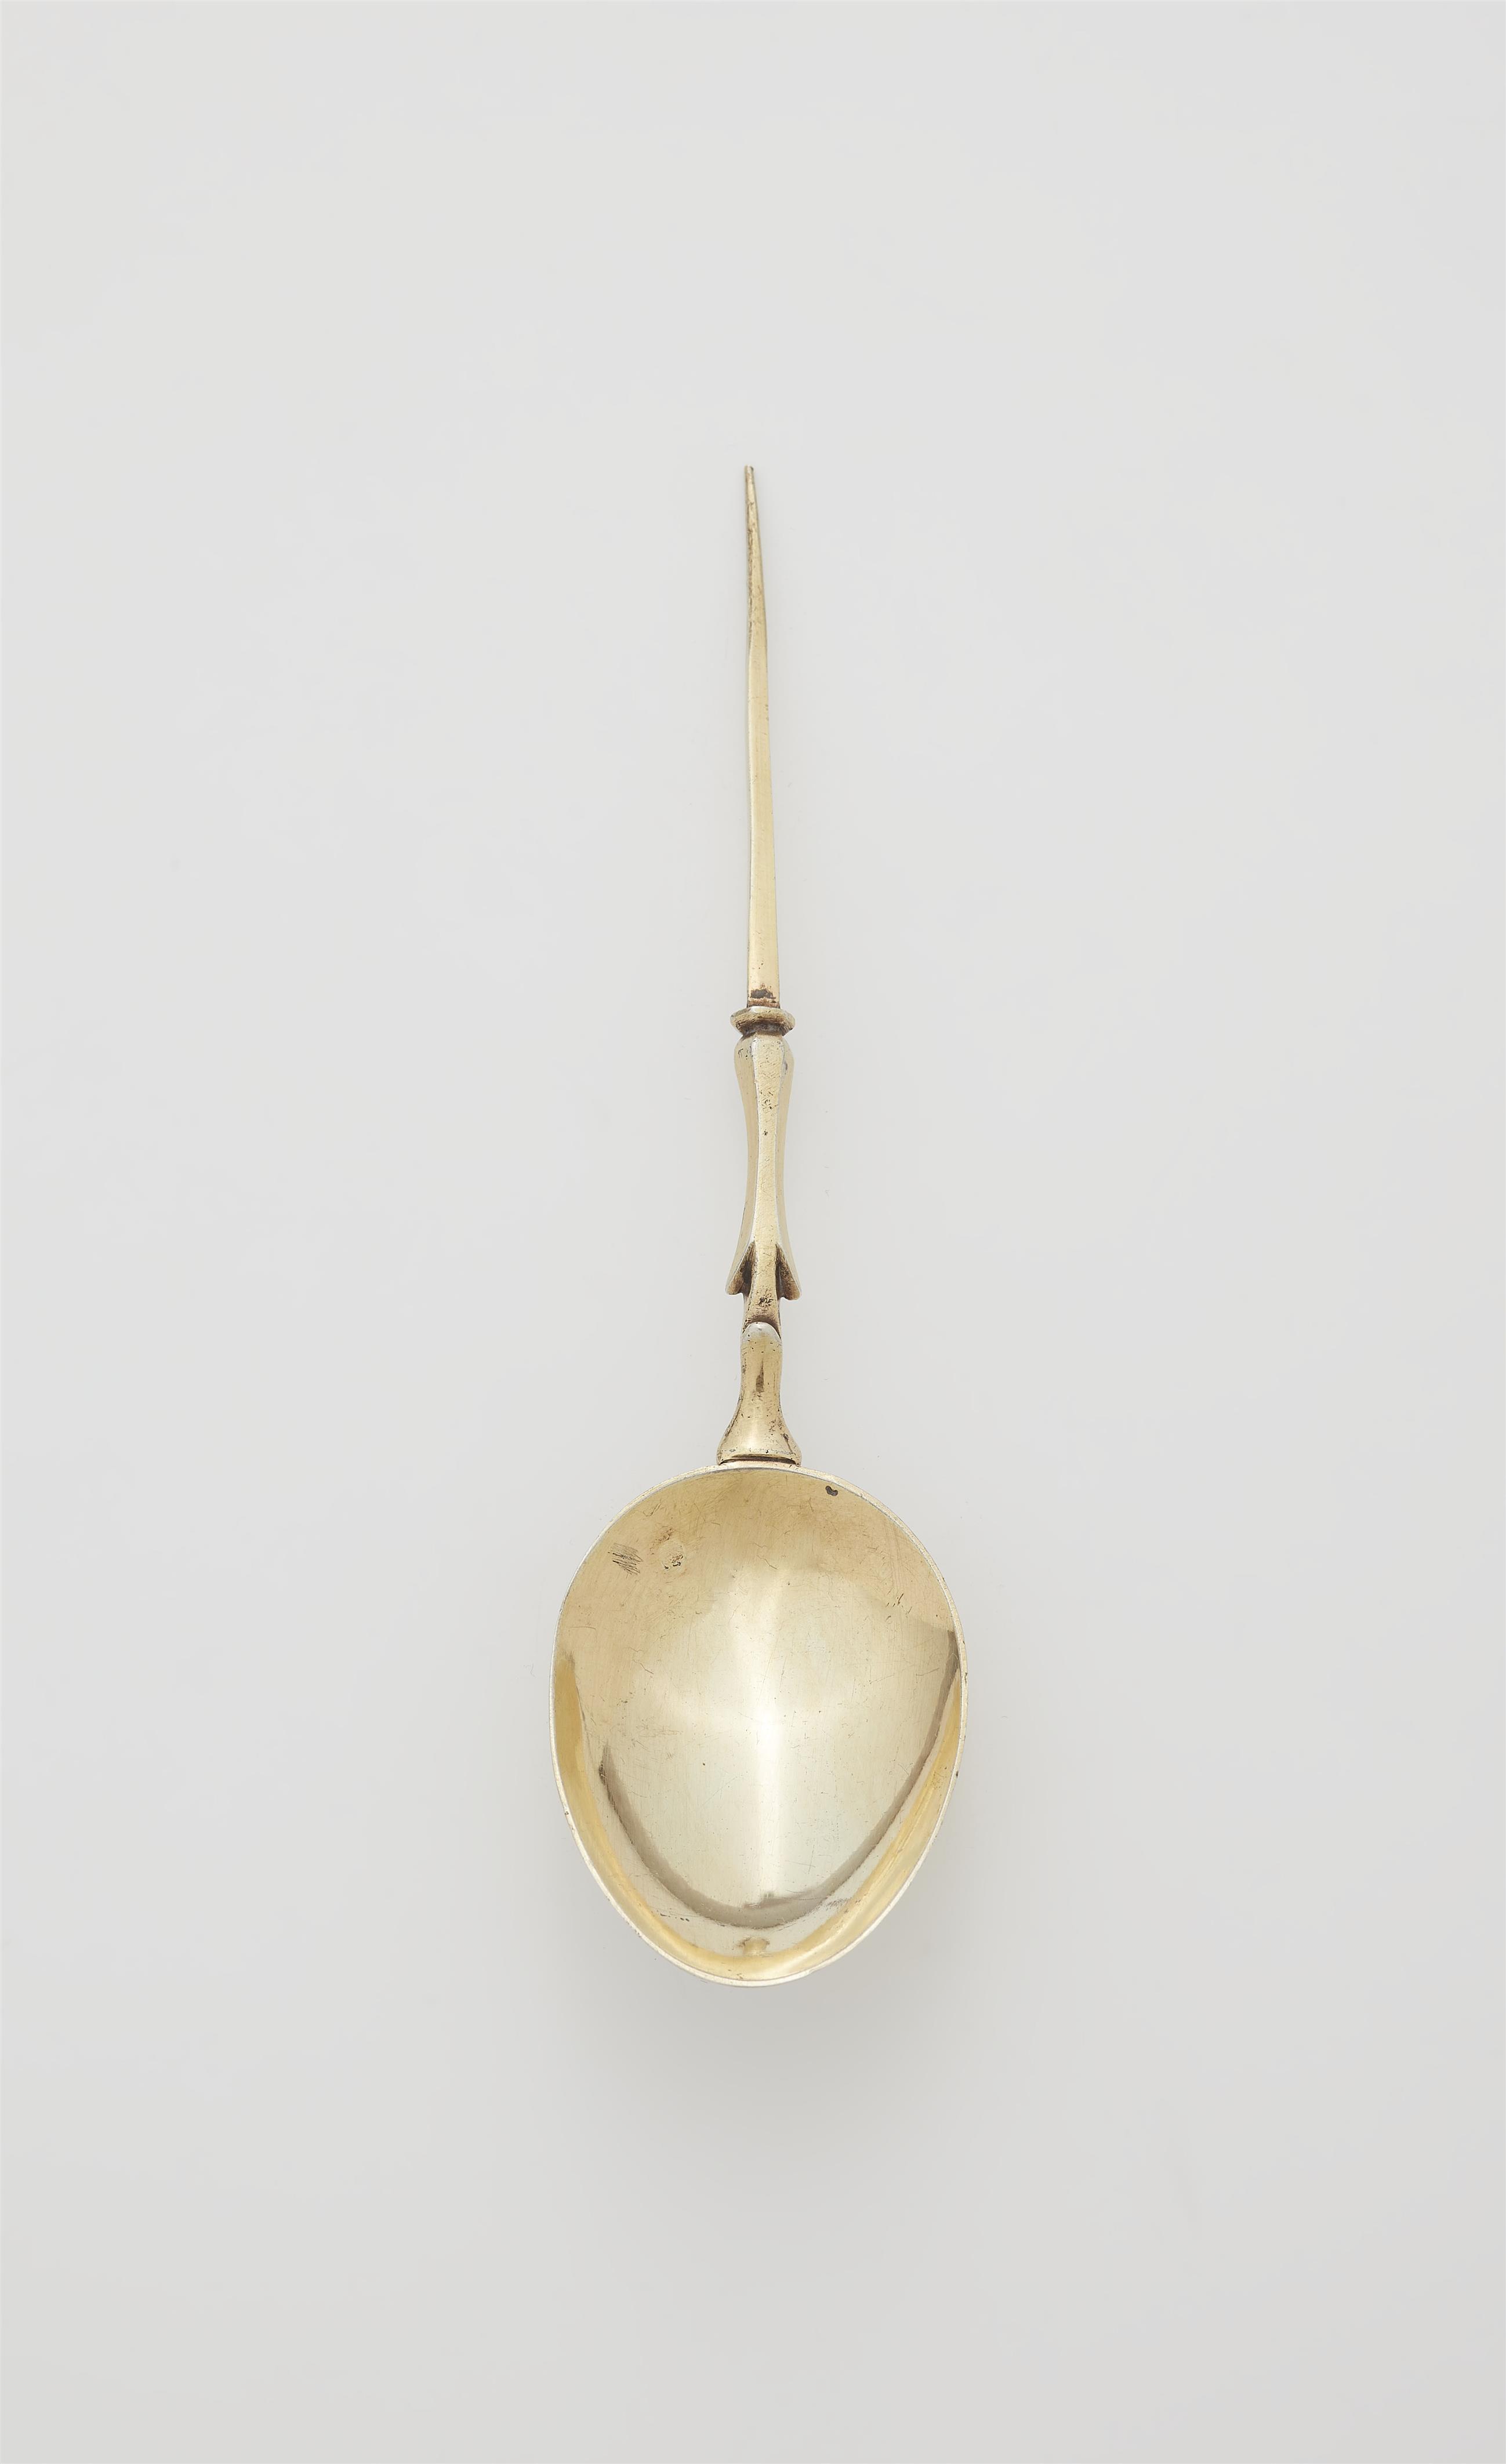 An Augsburg silver gilt spoon with a toothpick - image-1